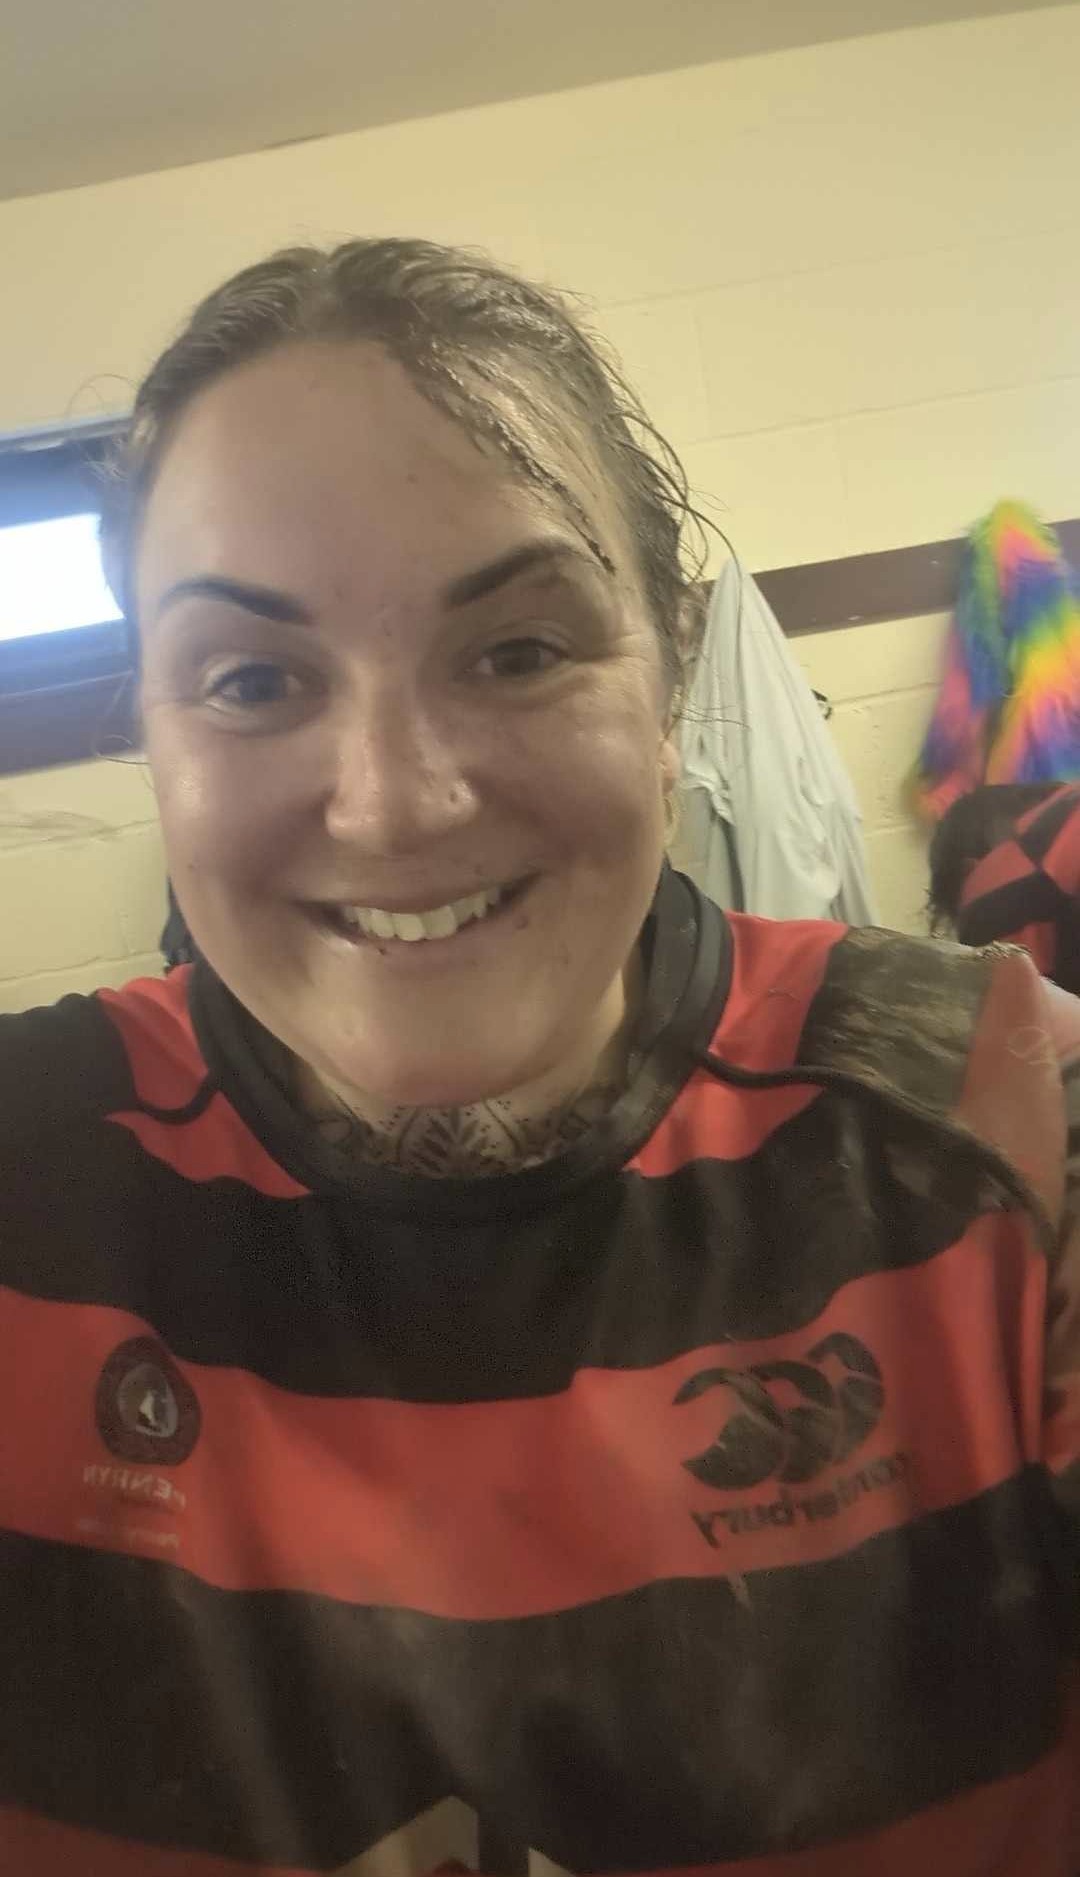 She only took up rugby when she joined the Navy